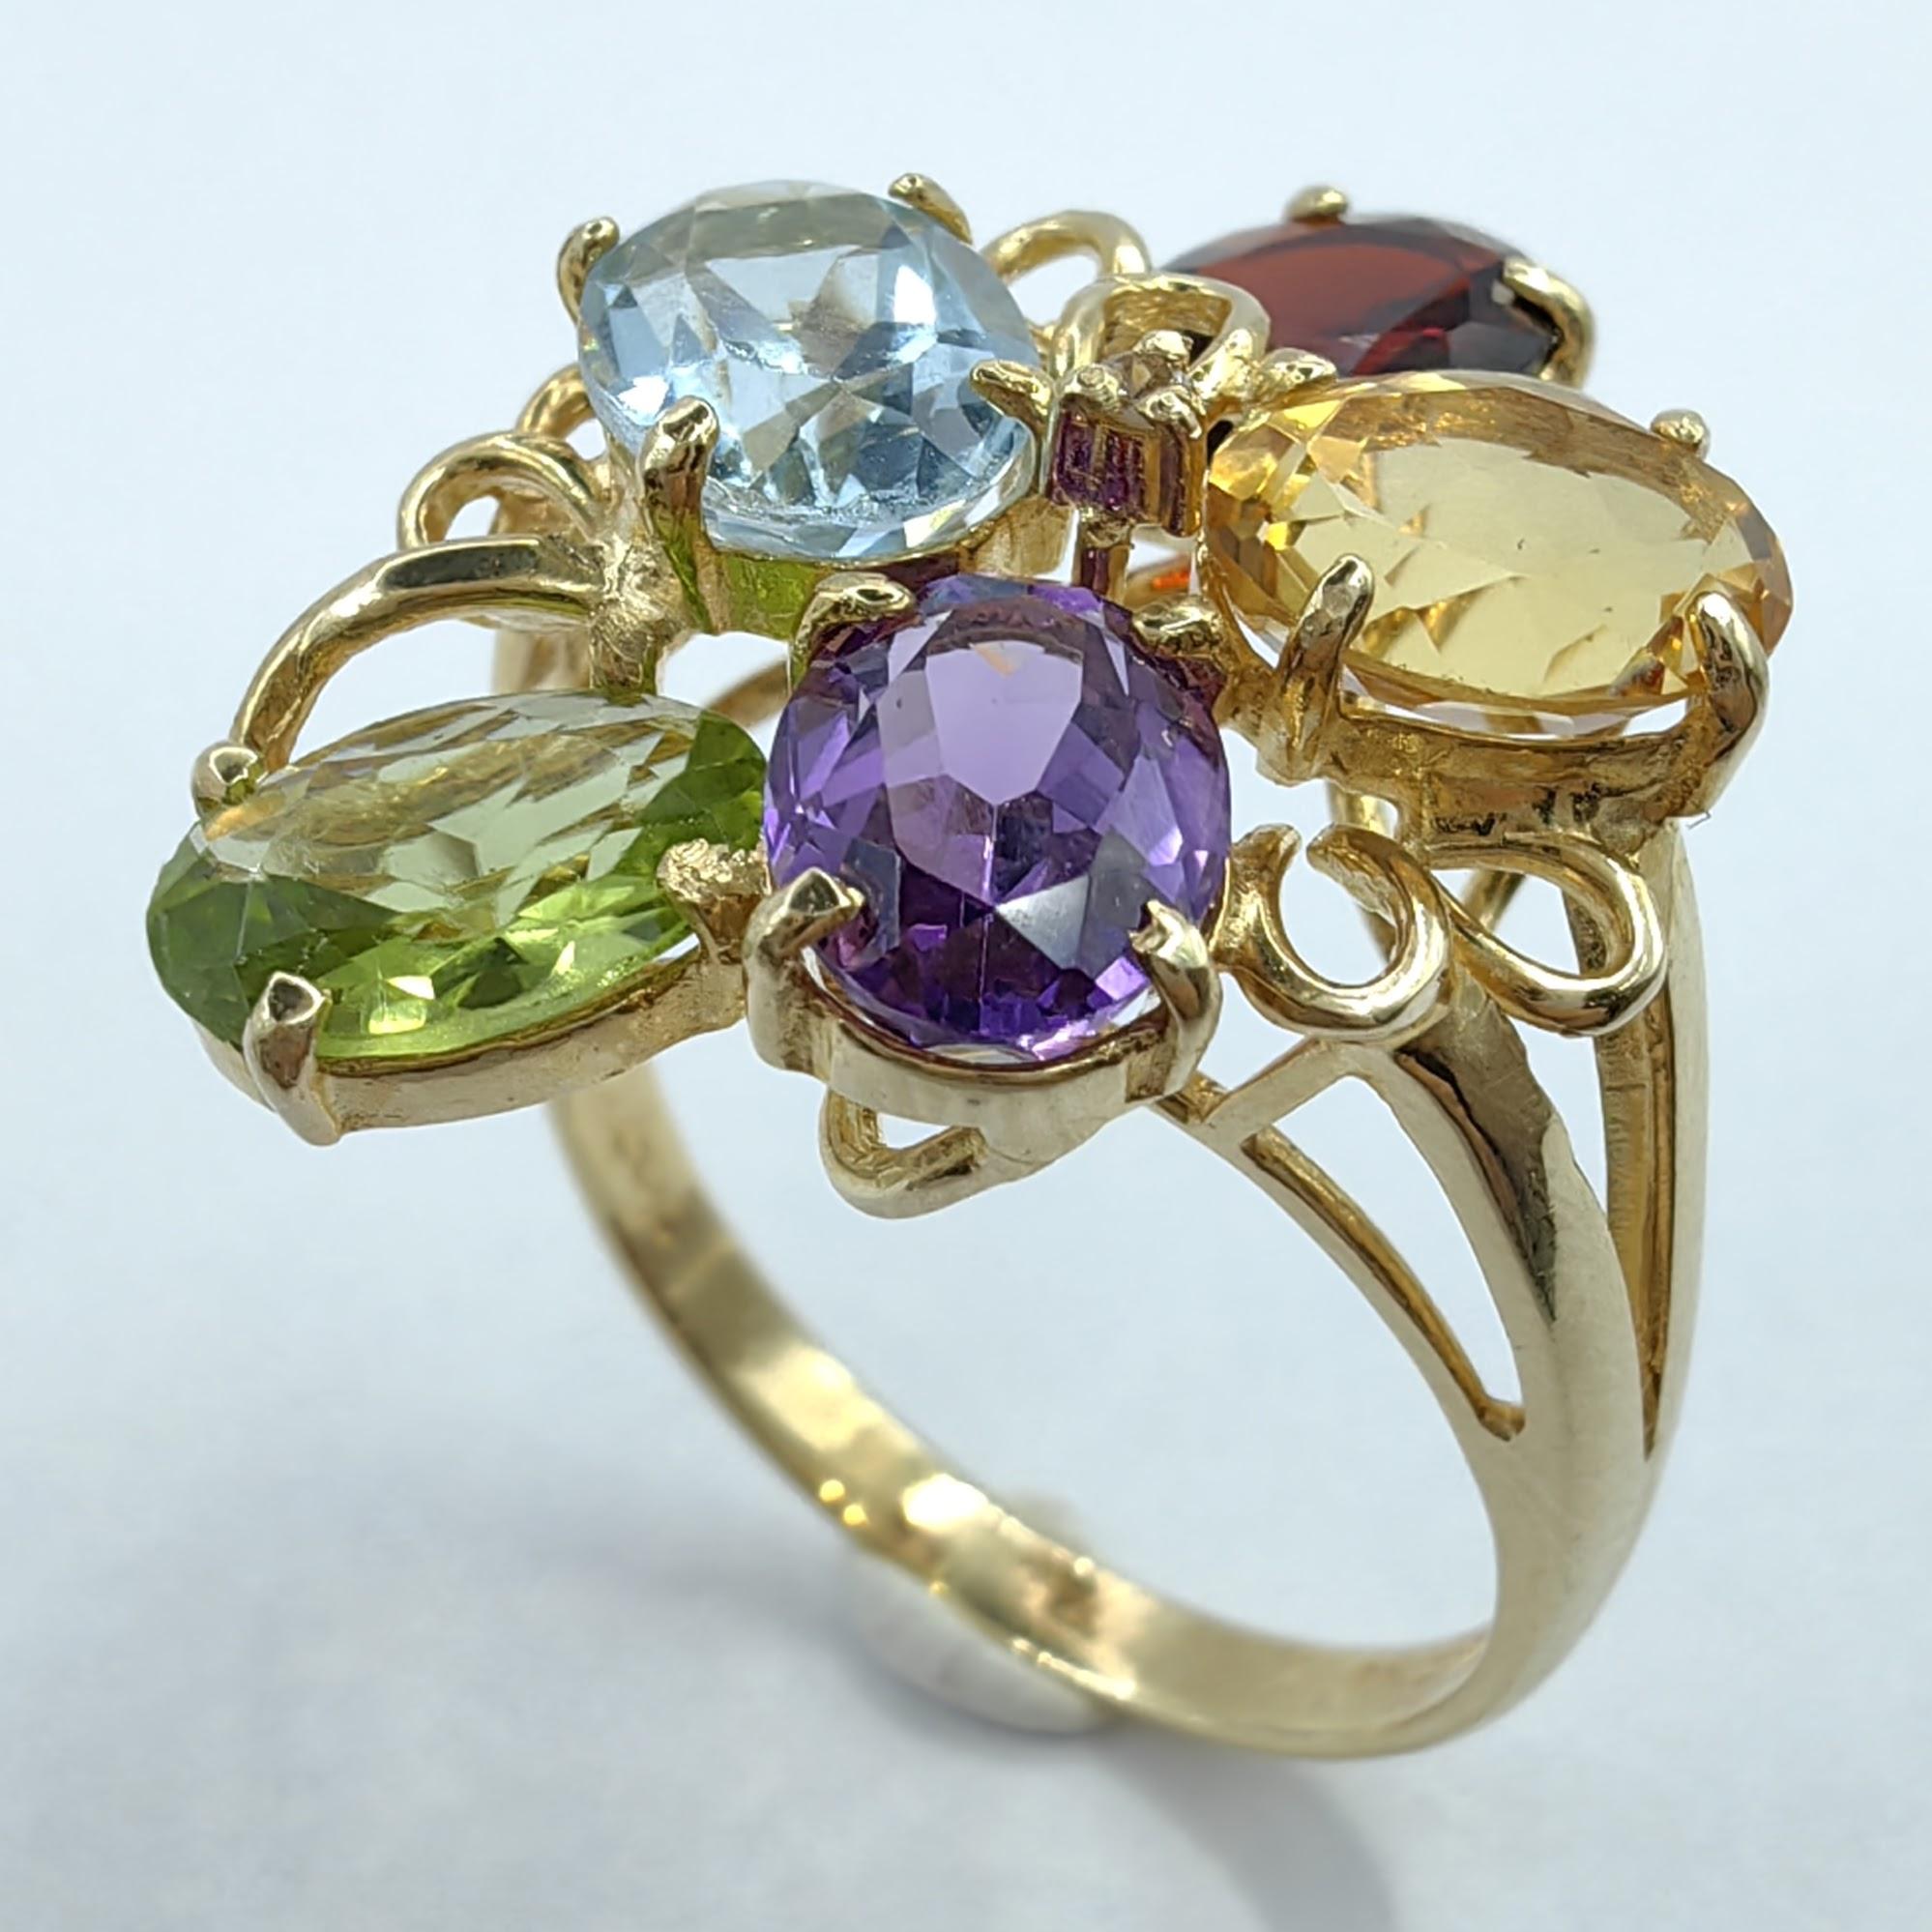 Introducing our vibrant Oval-cut Amethyst, Citrine, Garnet, Peridot, and Topaz Ring in 14K Yellow Gold. This playful and colorful ring showcases a delightful combination of oval-cut gemstones in various captivating hues, creating a visually